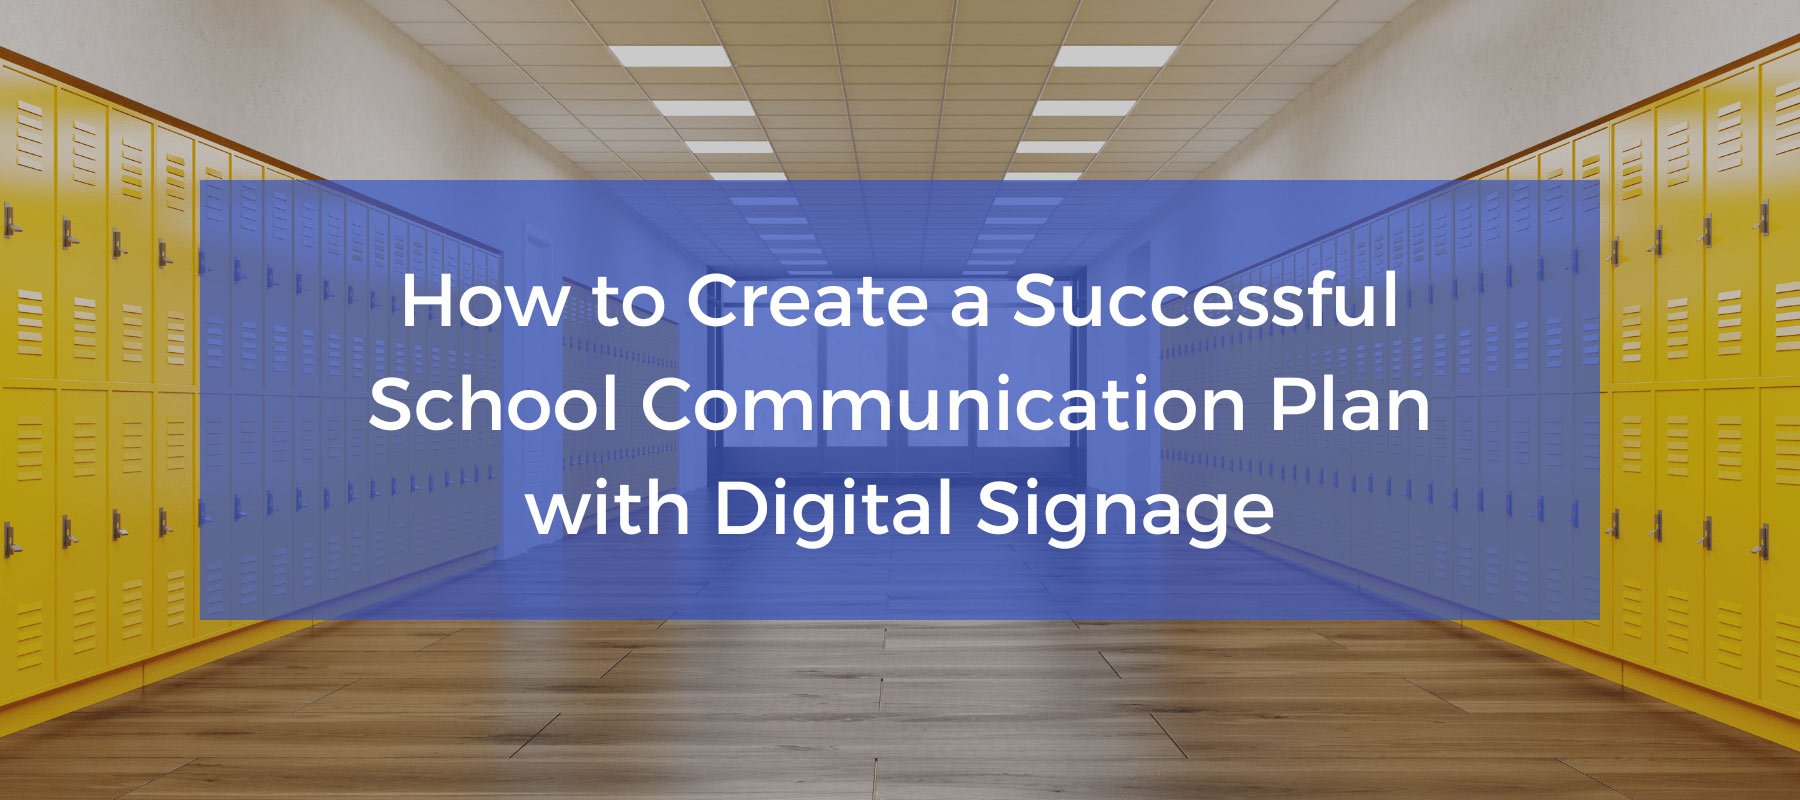 How to Create a Successful School Communication Plan with Digital Signage